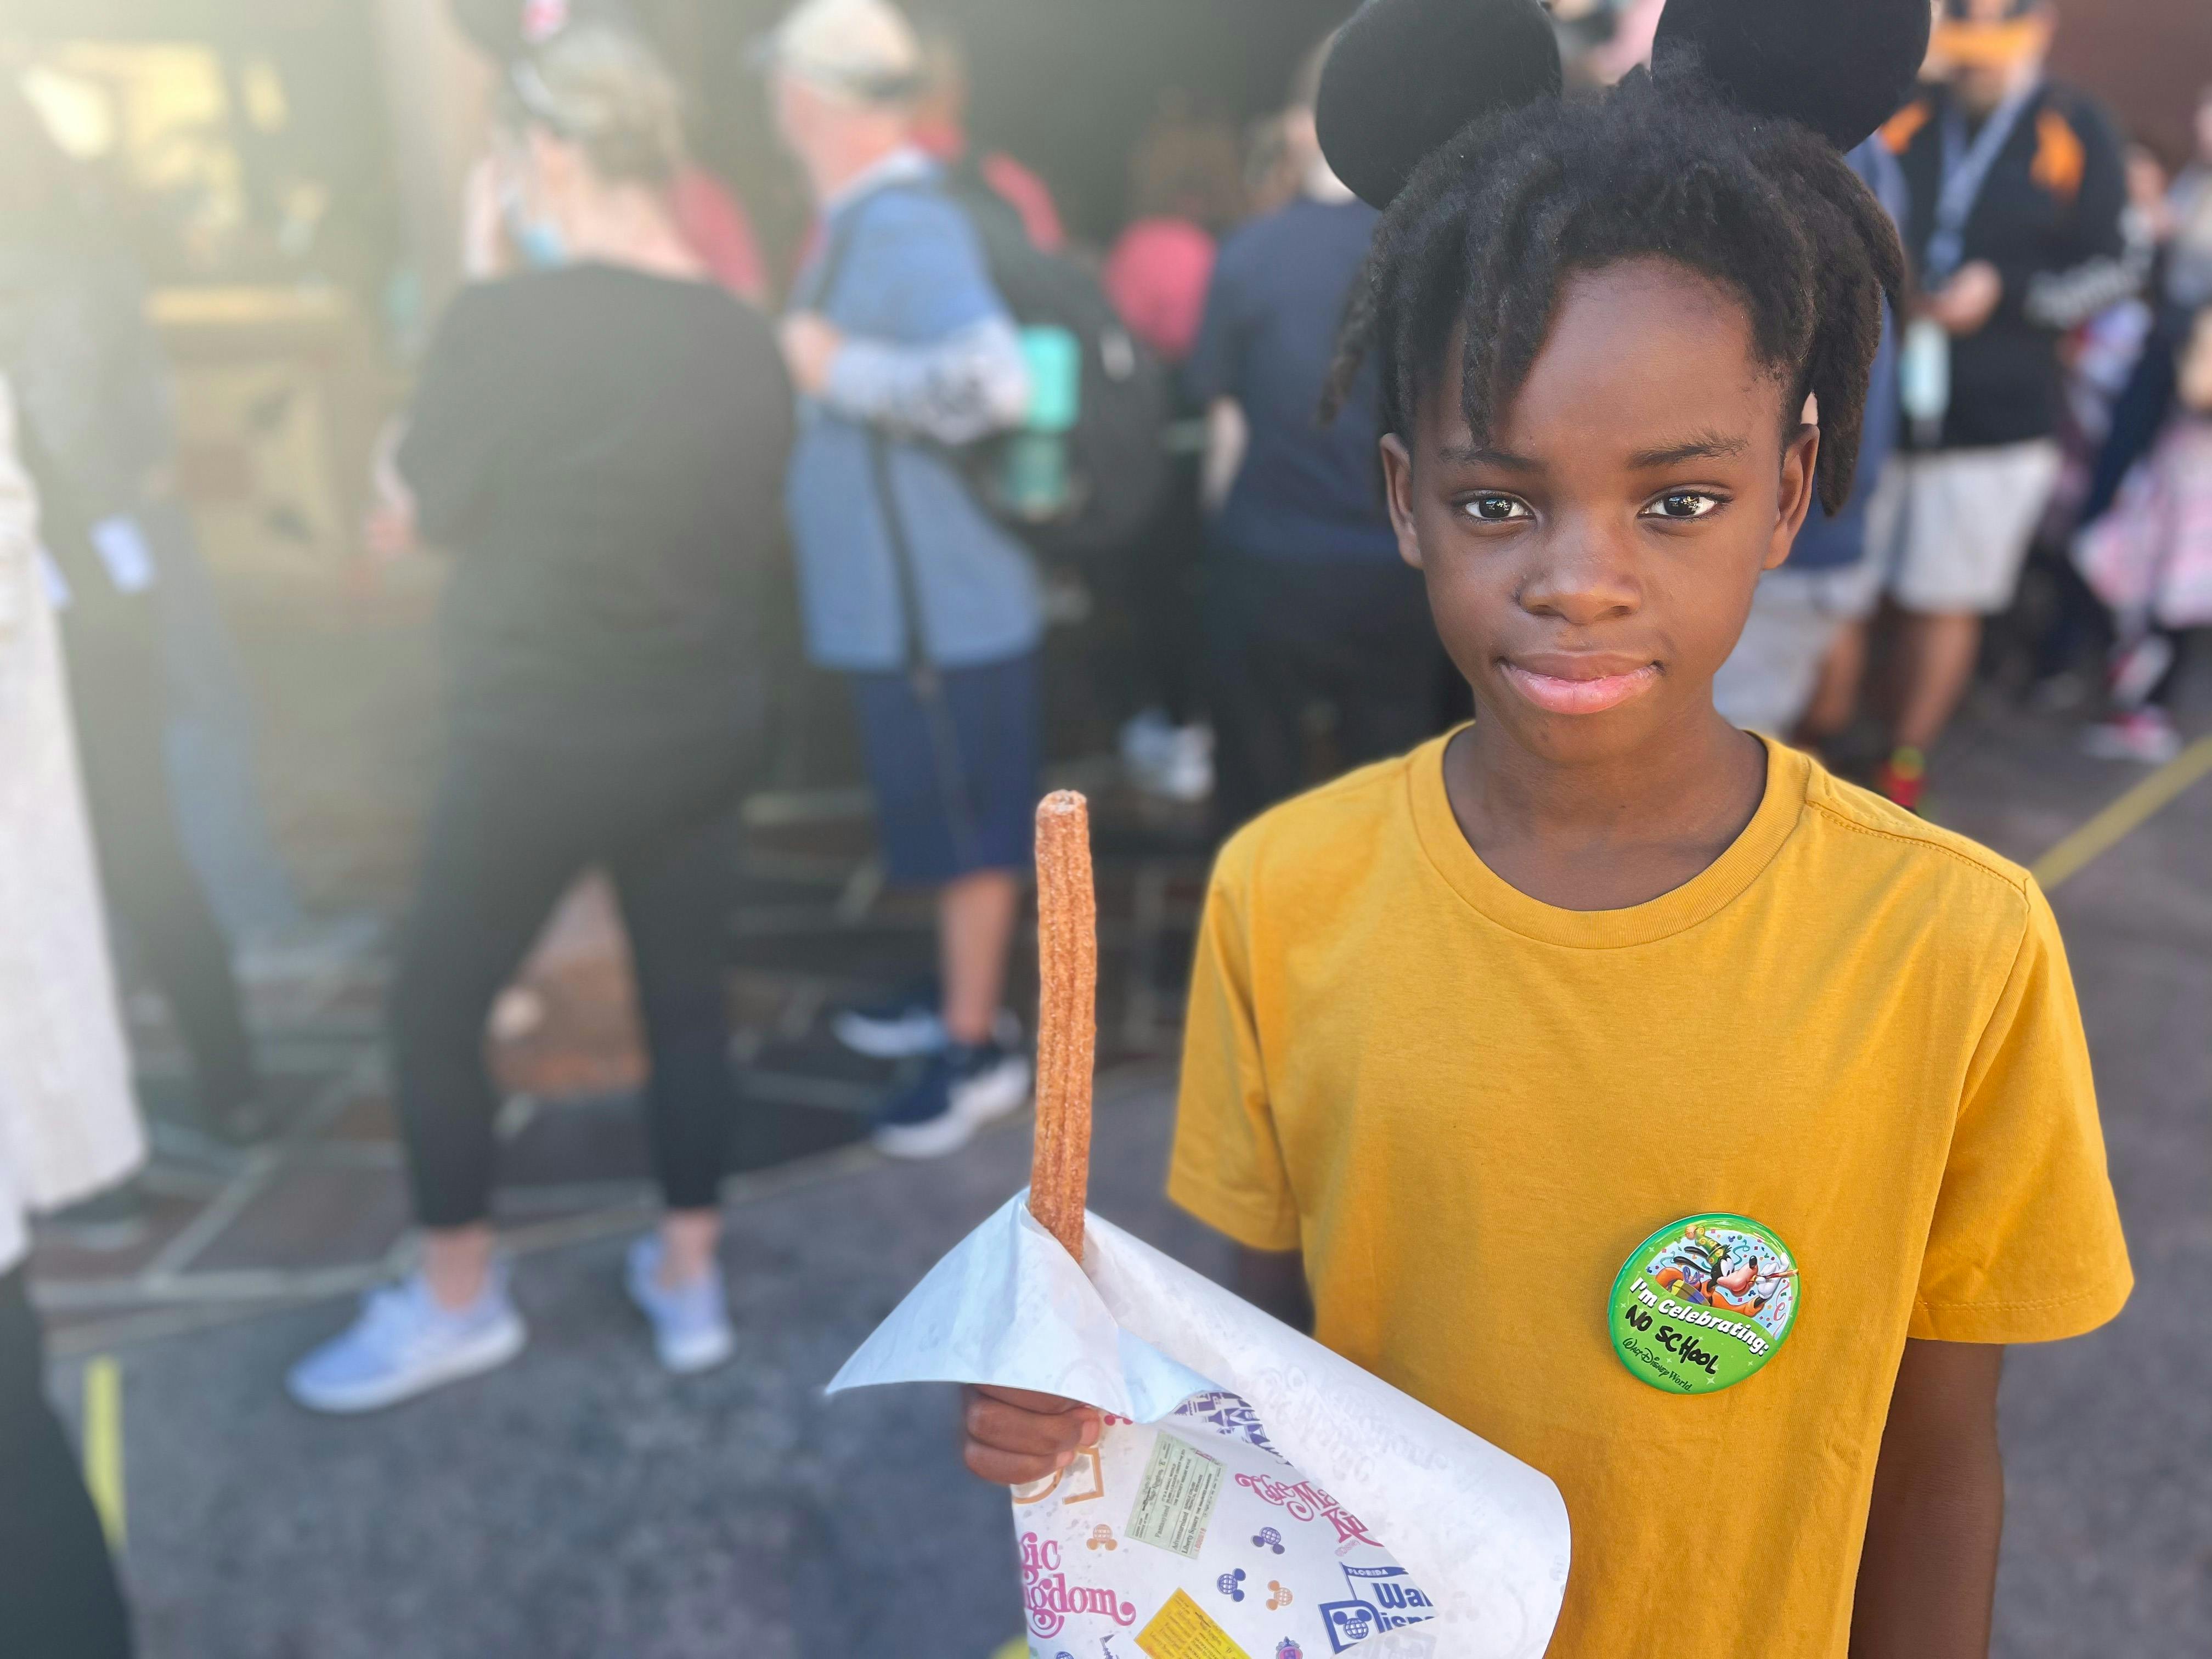 A child with Mickey Mouse ears and a celebration button standing in a line holding a churro.